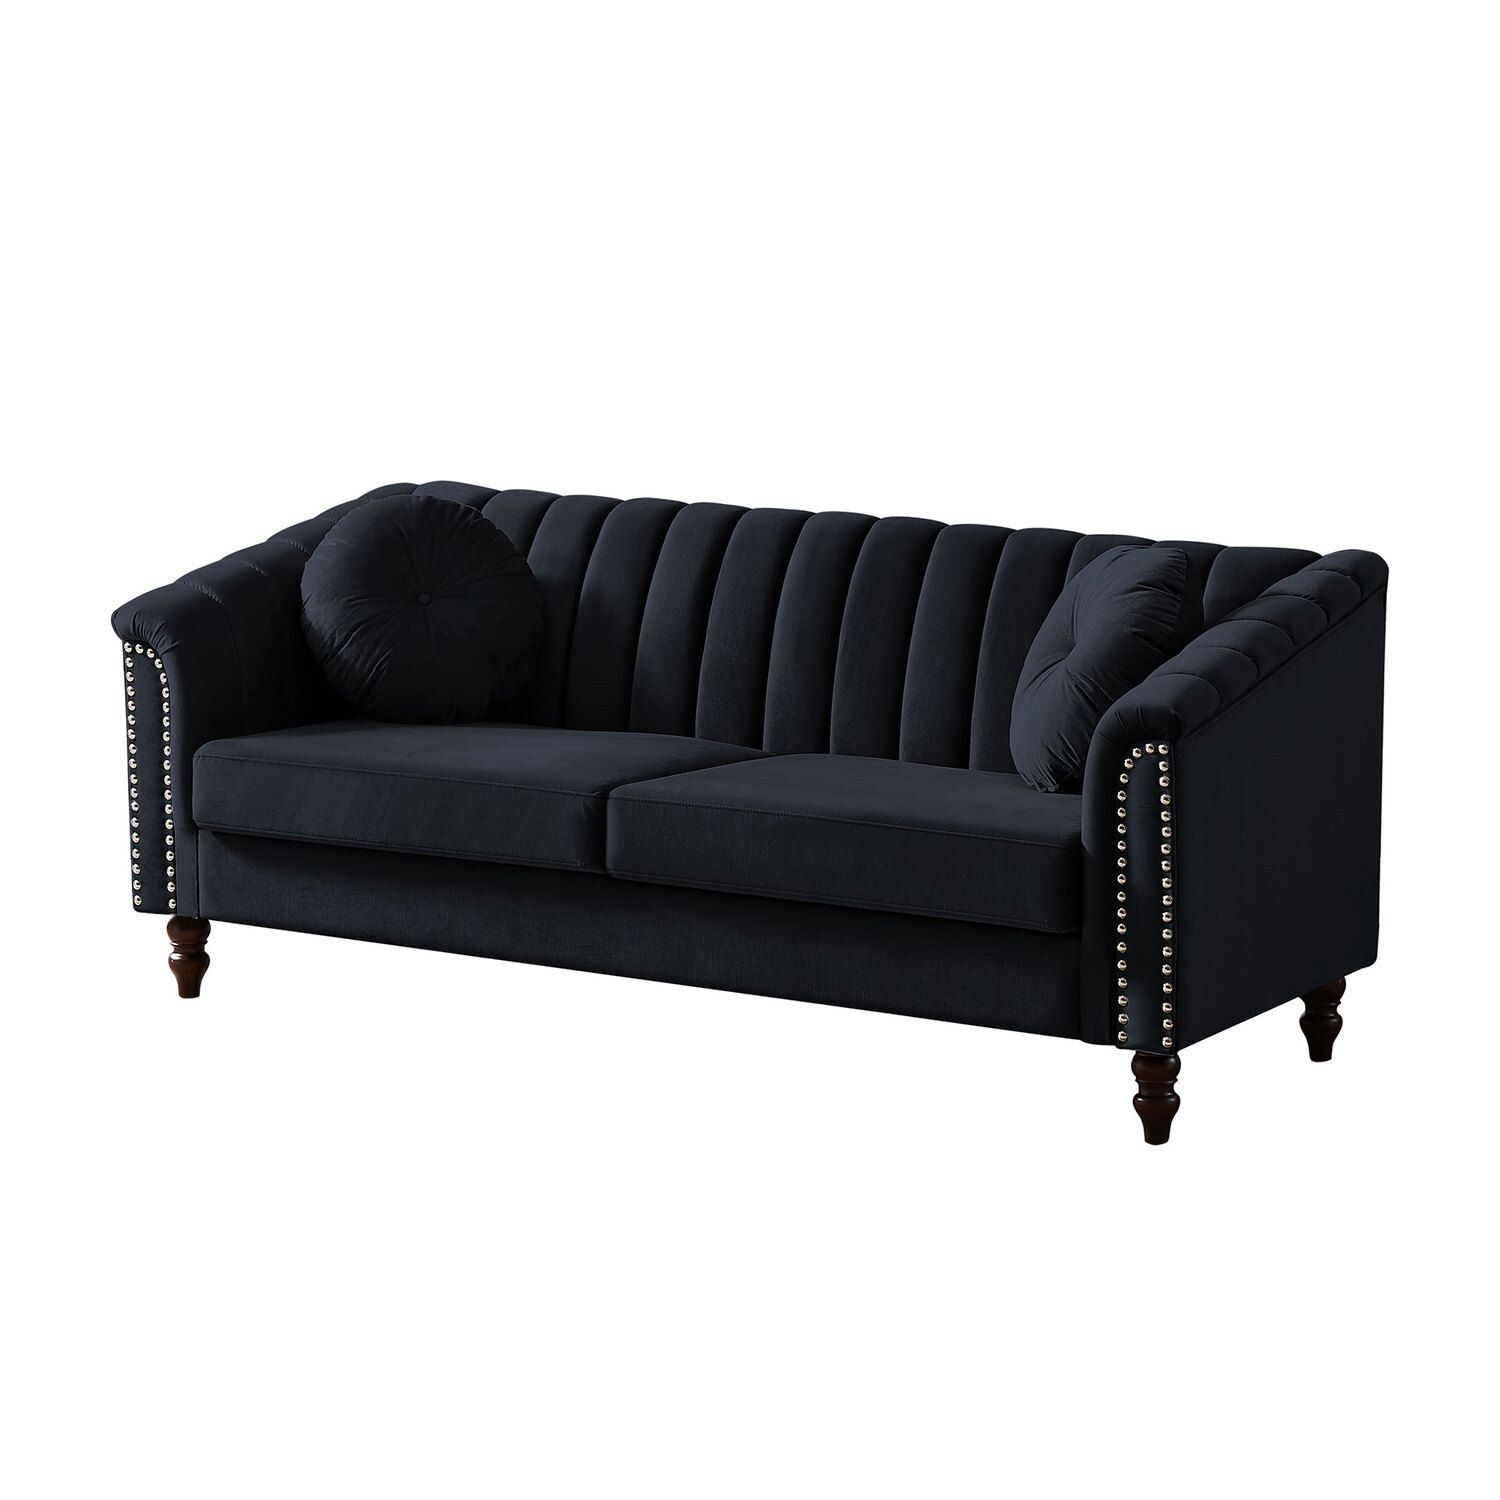 Jasmoder Modern Black Velvet Tufted Sofa 75 In Contemporary/Modern Medium  Size In The Couches, Sofas & Loveseats Department At Lowes Within Black Velvet 2 Seater Sofa Beds (Photo 14 of 15)